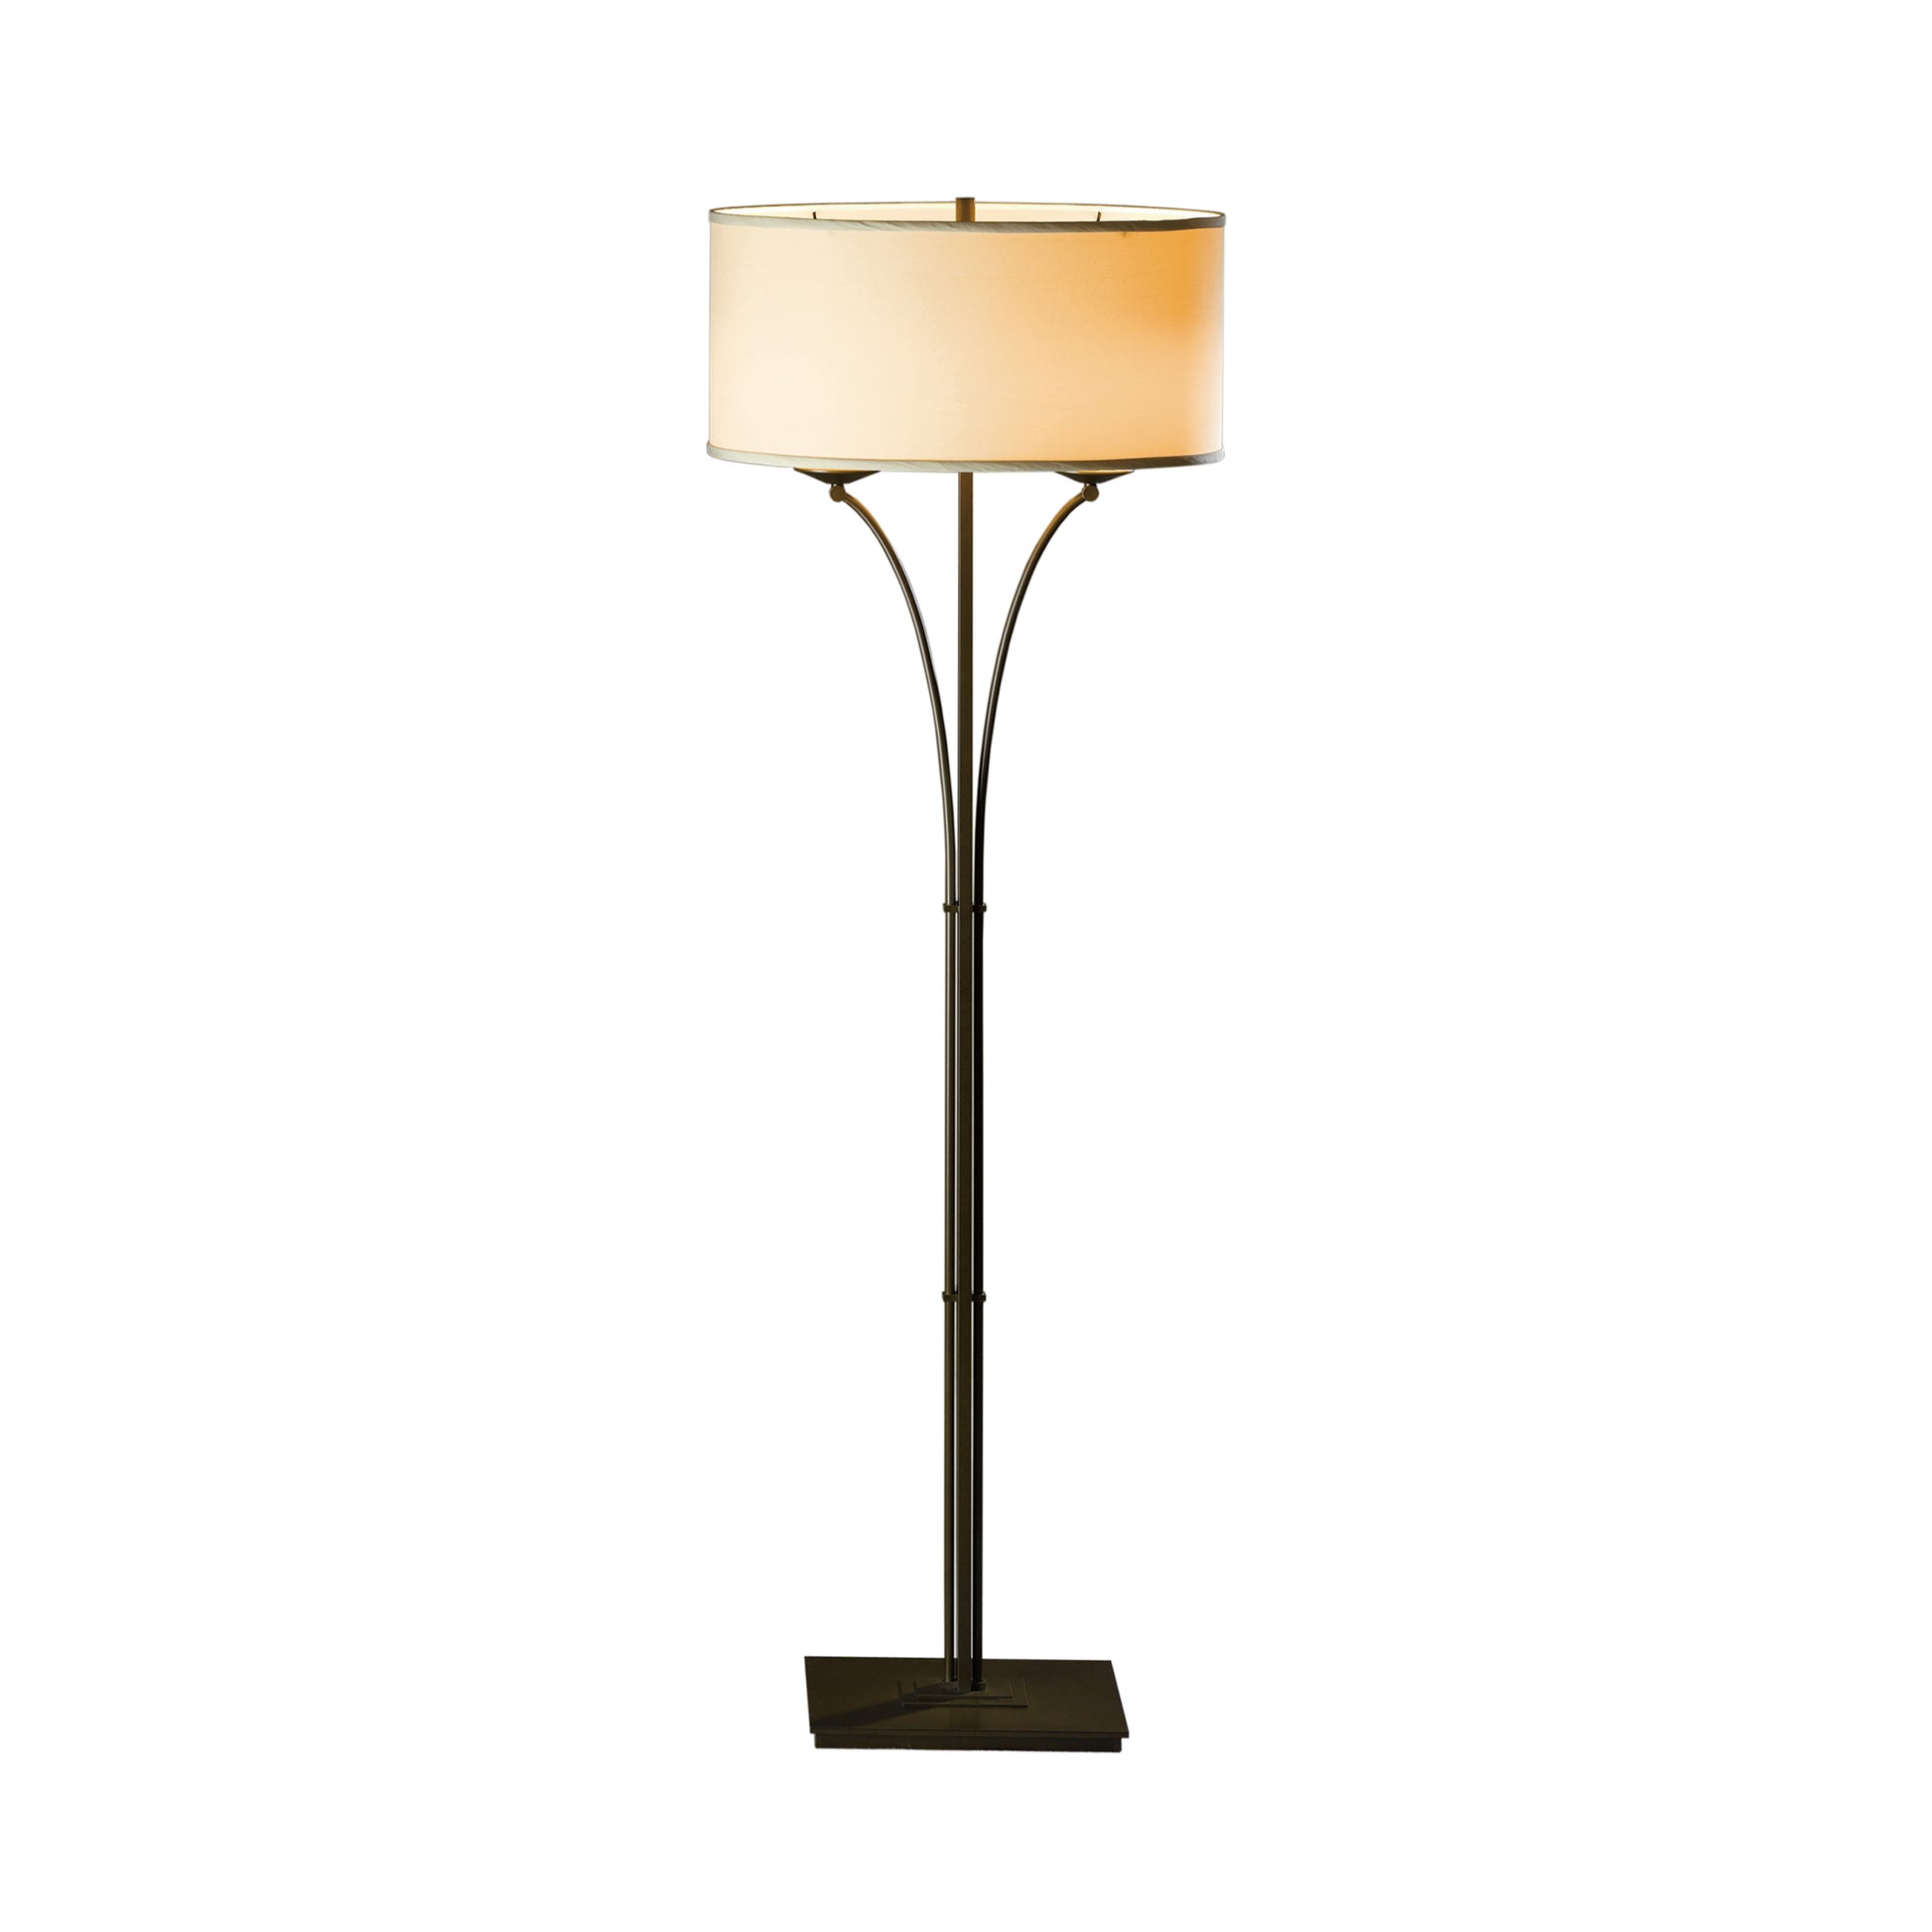 A Hubbardton Forge Formae Contemporary Floor Lamp with a bronze finish, featuring a slender metal post with three curved arms supporting a cream-colored lampshade, hand-crafted and isolated on a white background.